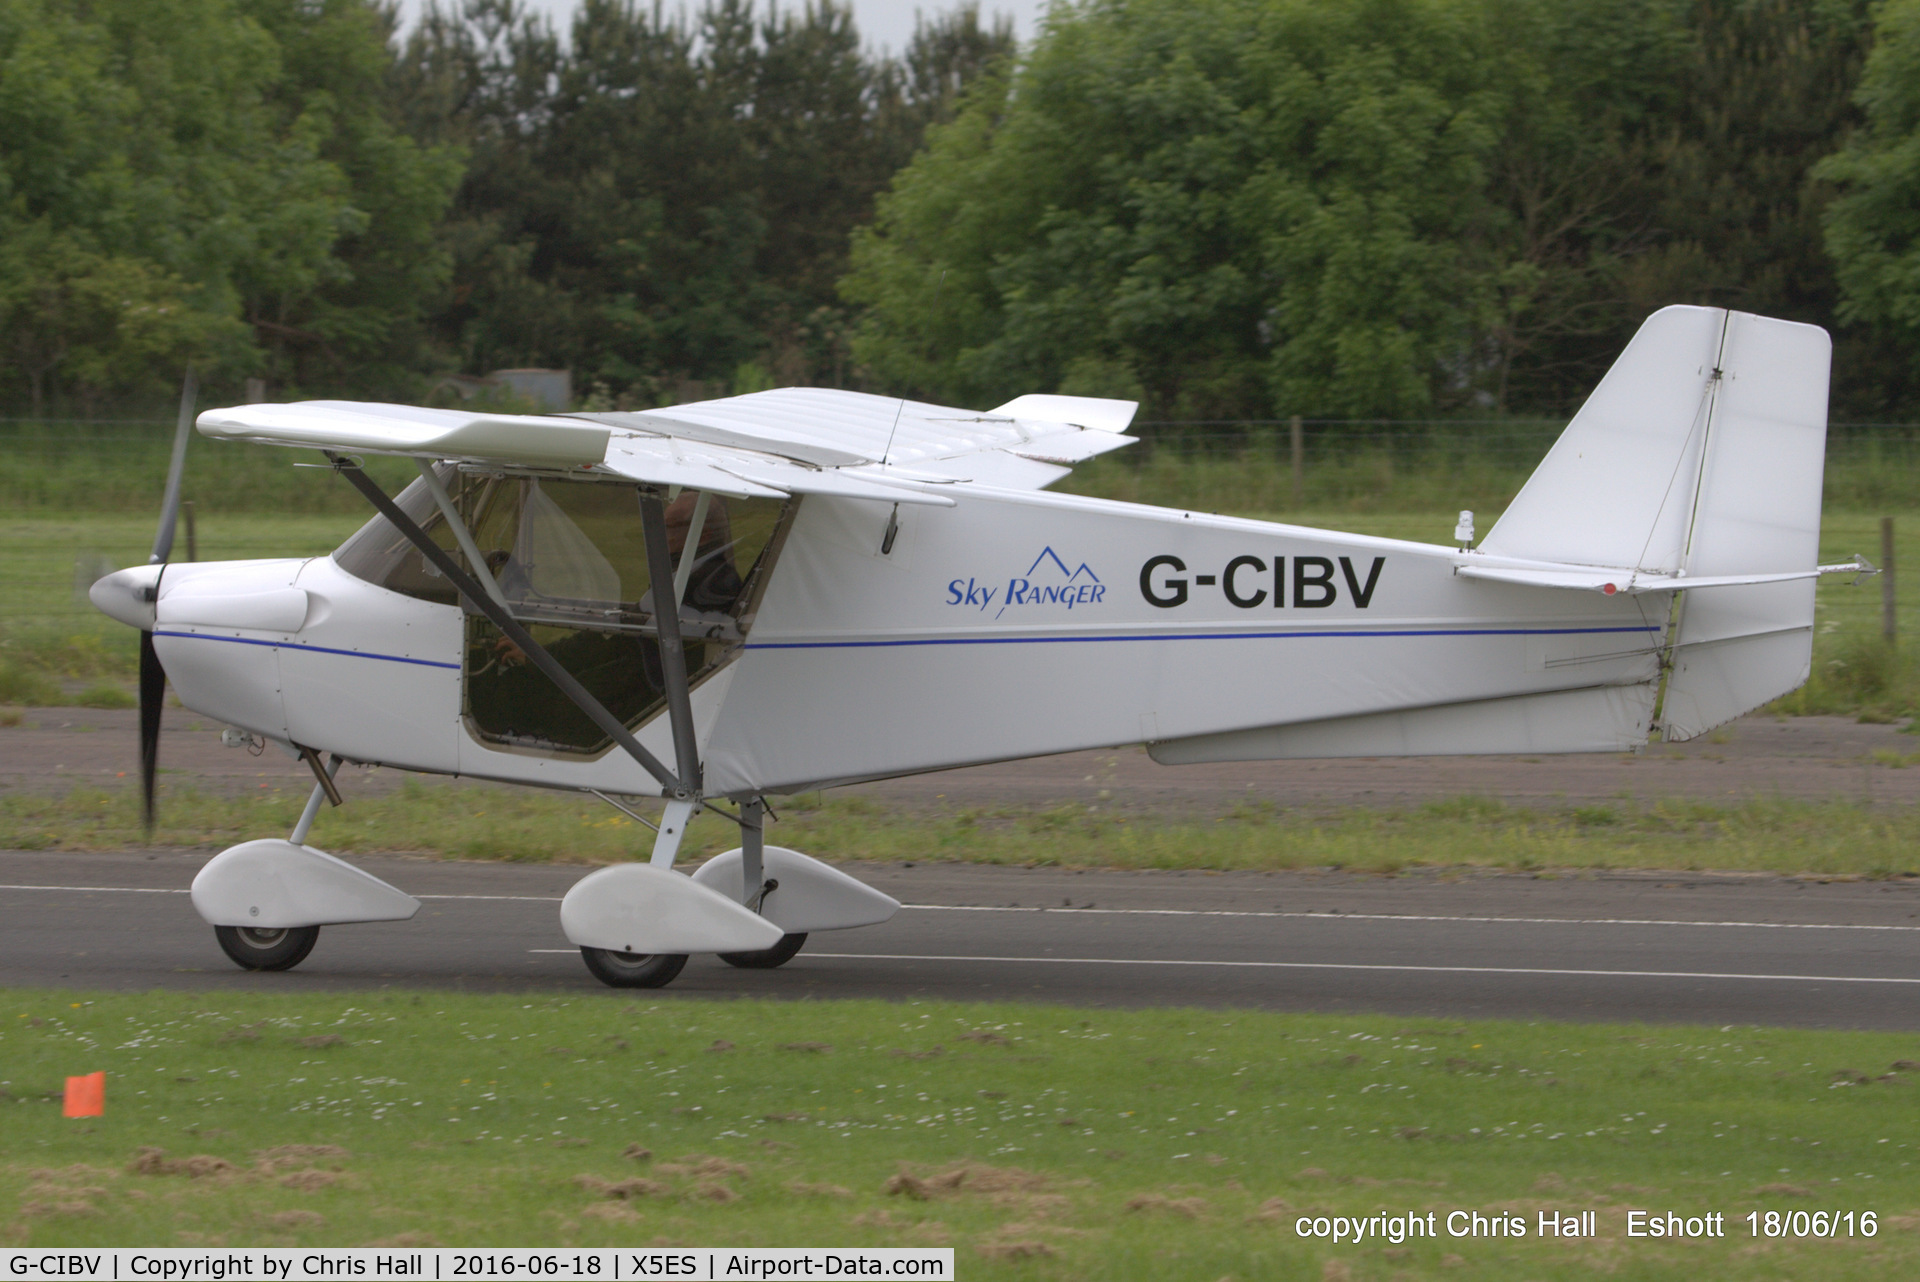 G-CIBV, 2013 Skyranger Swift 912S(1) C/N BMAA/HB/640, at the Great North Fly in. Eshott